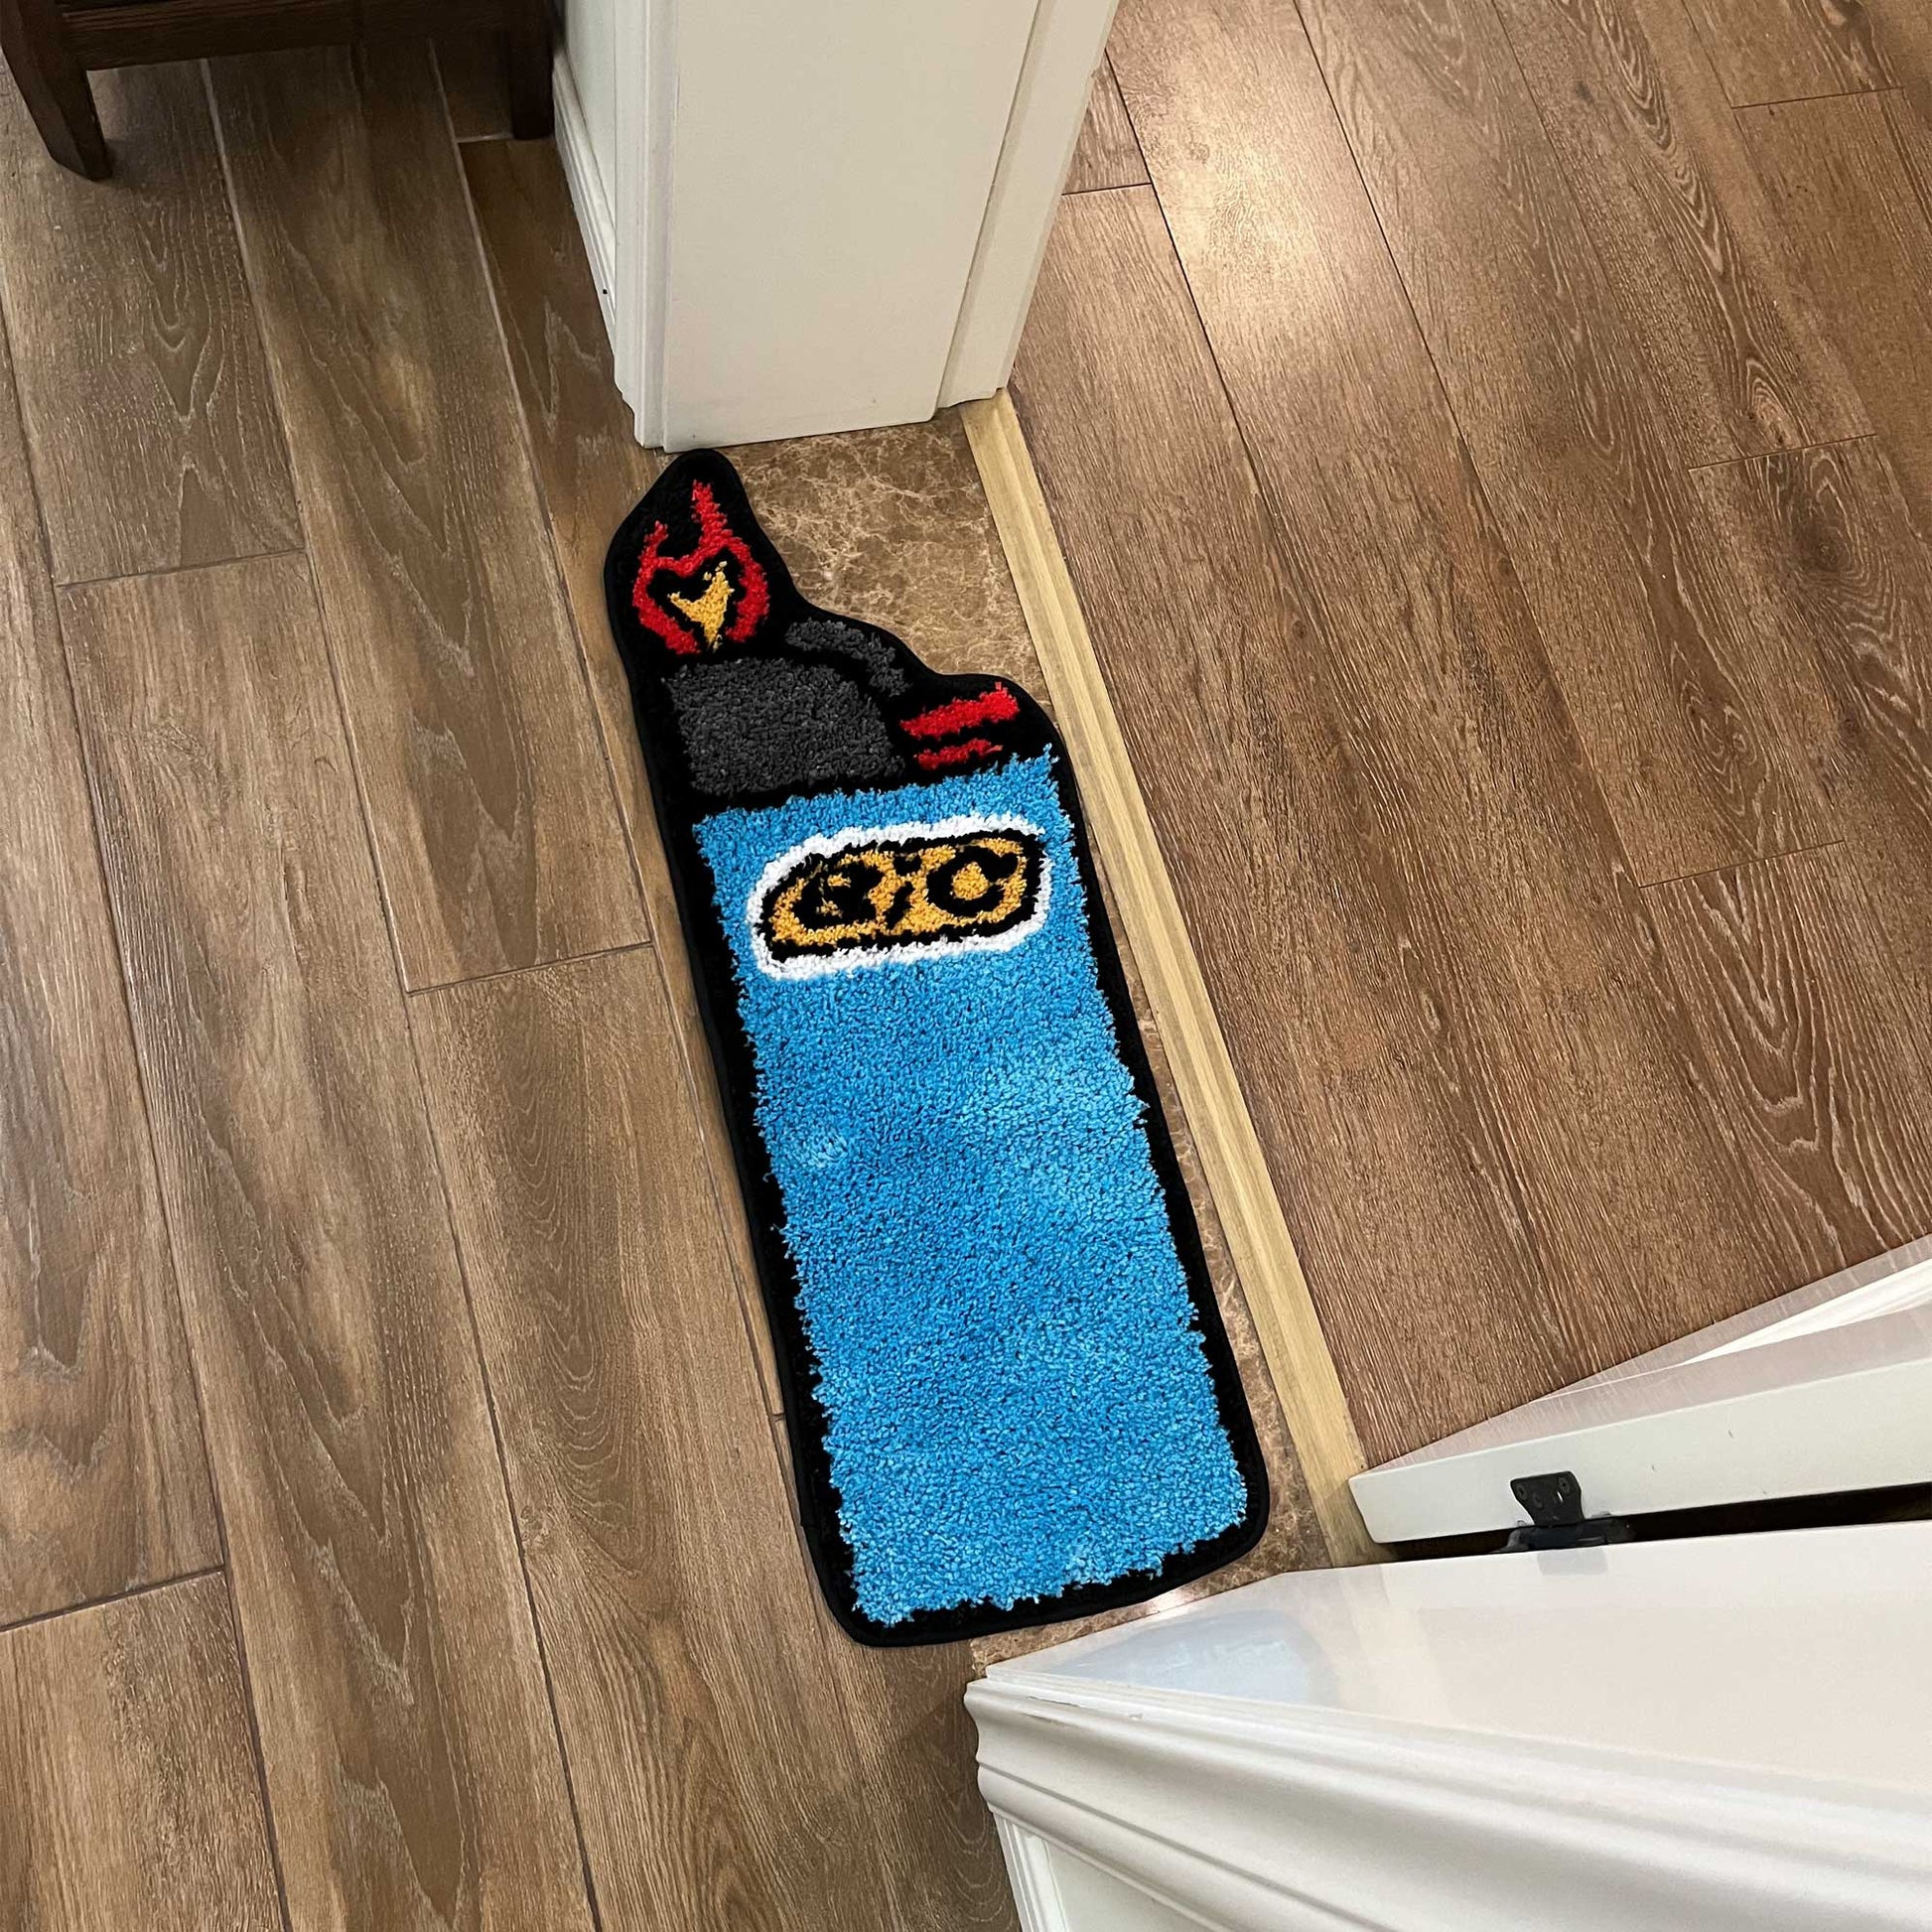 Tufted Rug Bic Lighter Rug in an Entryway